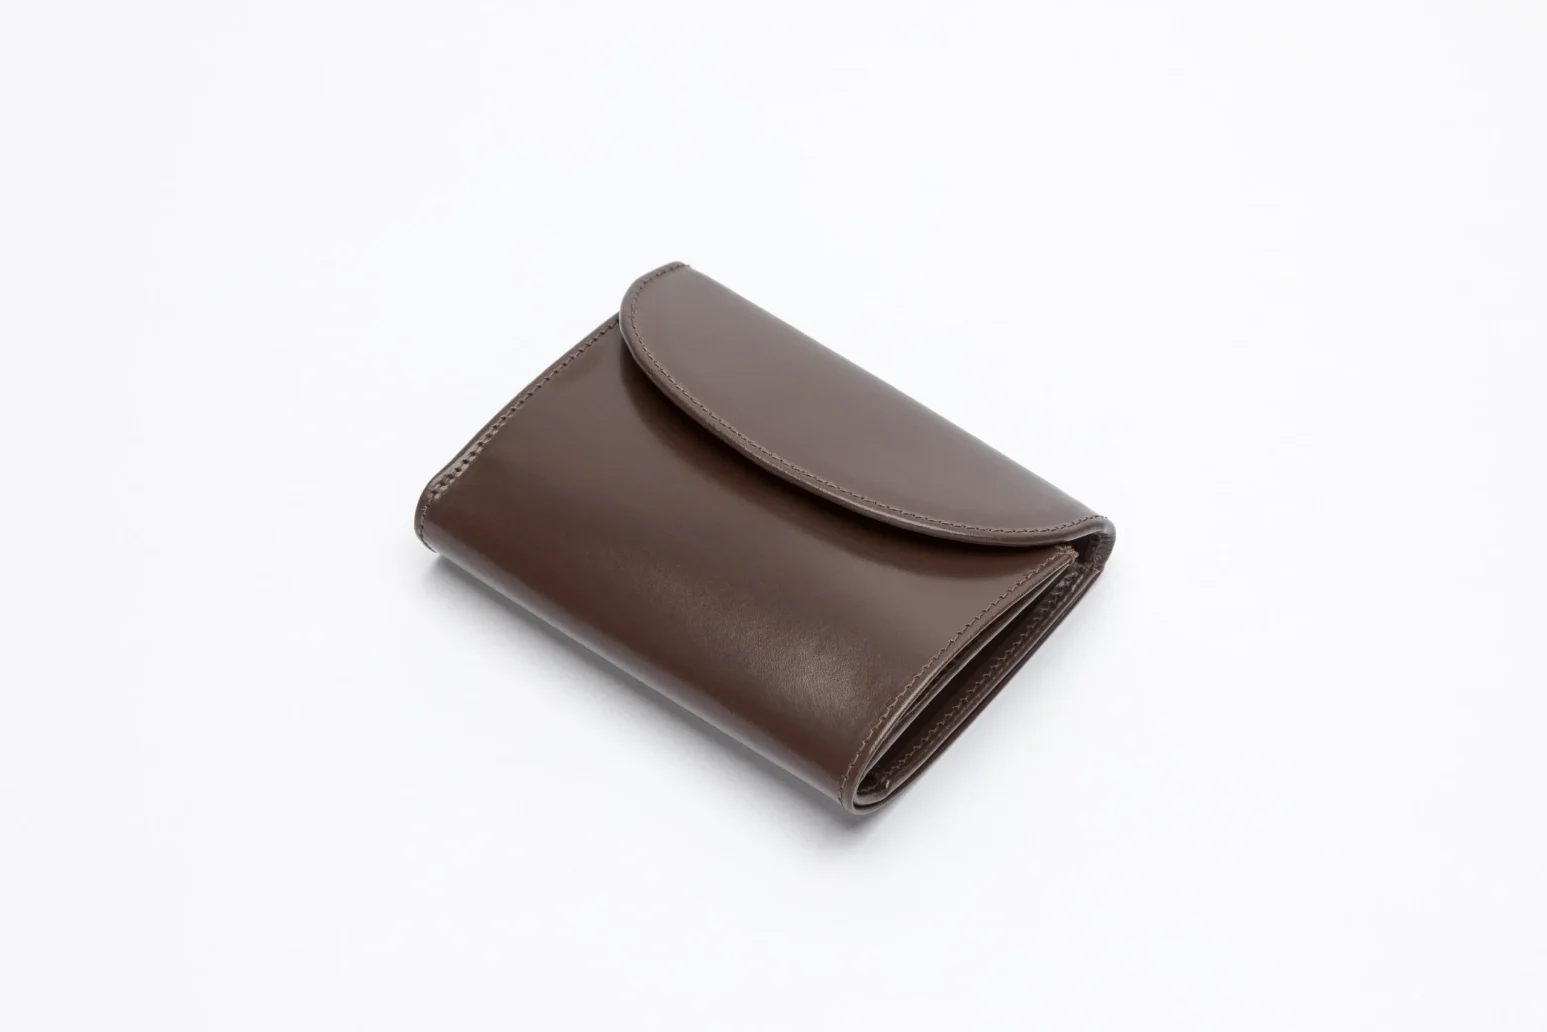 The Wentworth 3 Fold Purse in Bridle Brown